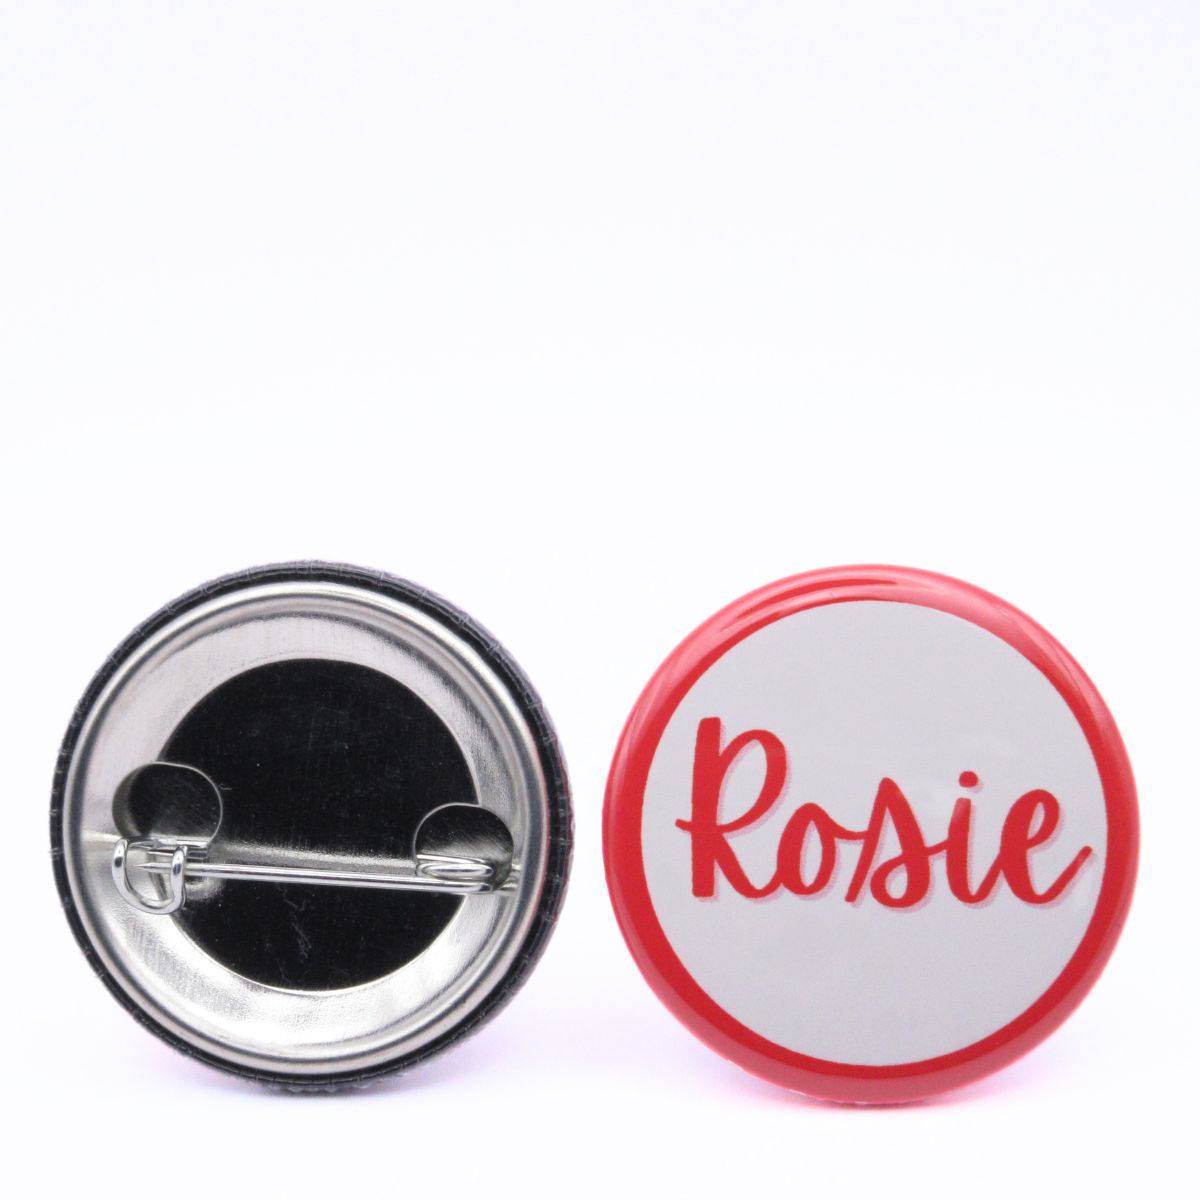 BooBooRoo Pinback Button (i.e. button, badge, pin) of a name badge with the name, "Rosie" in homage to Rosie the Riveter's uniform. Image showing front and back of high-quality metal button.